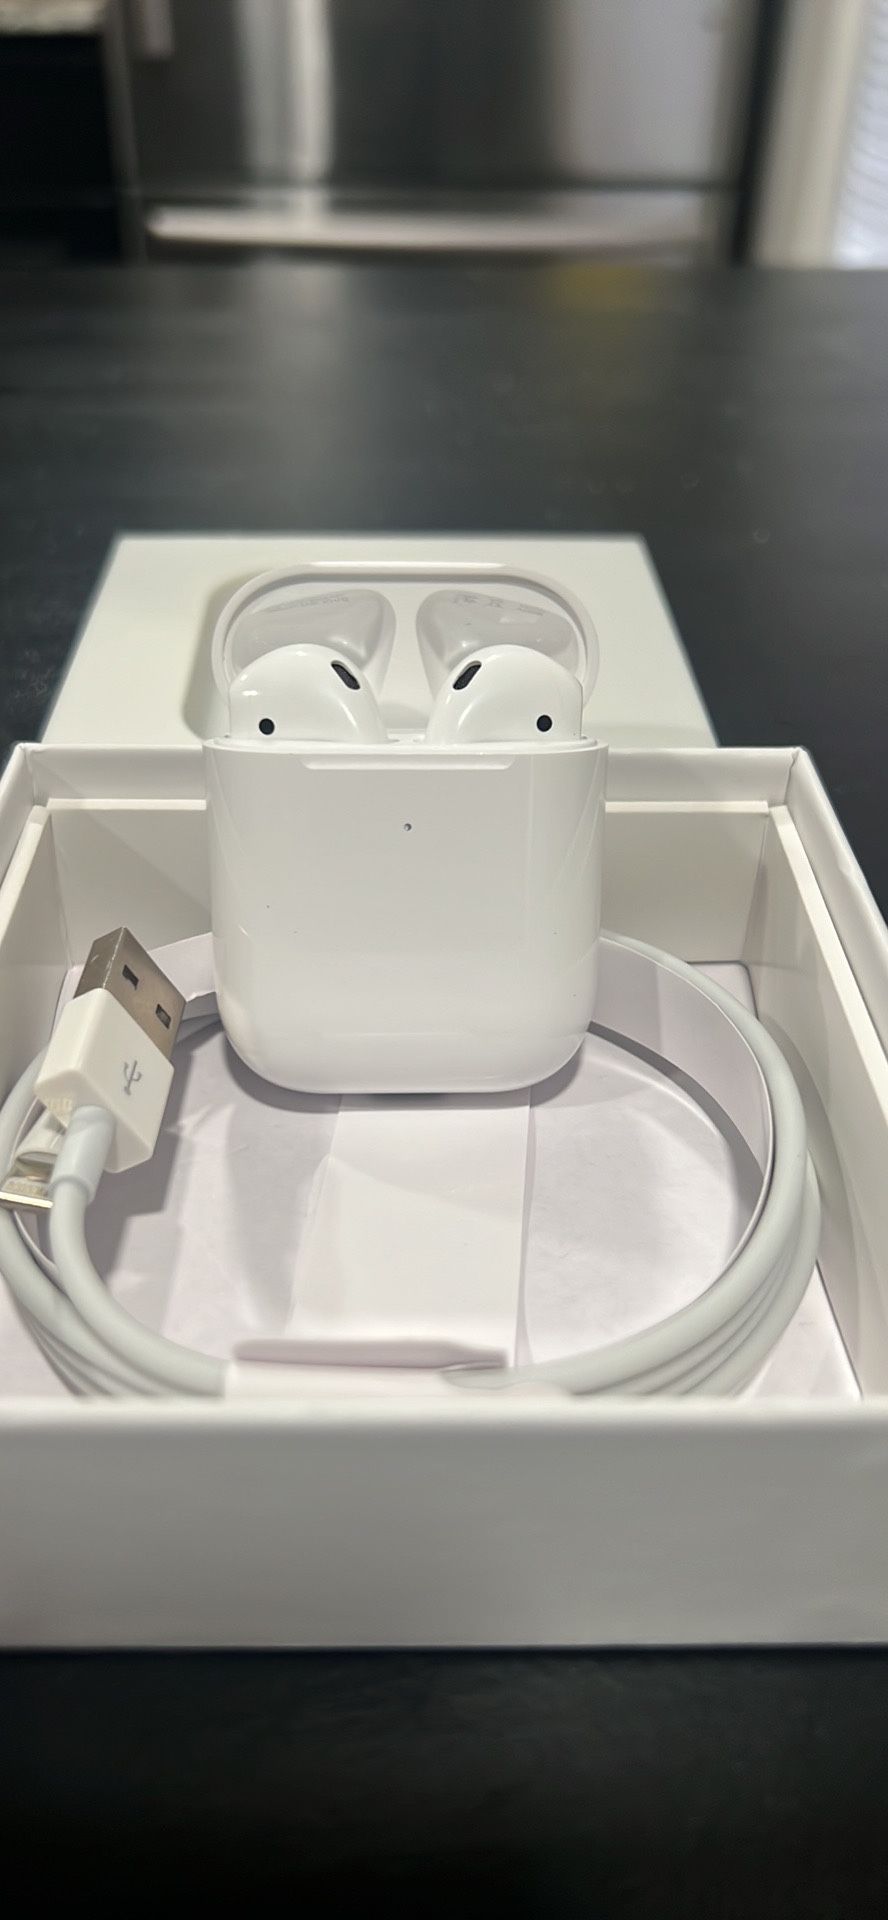 AirPods 2nd Generation 